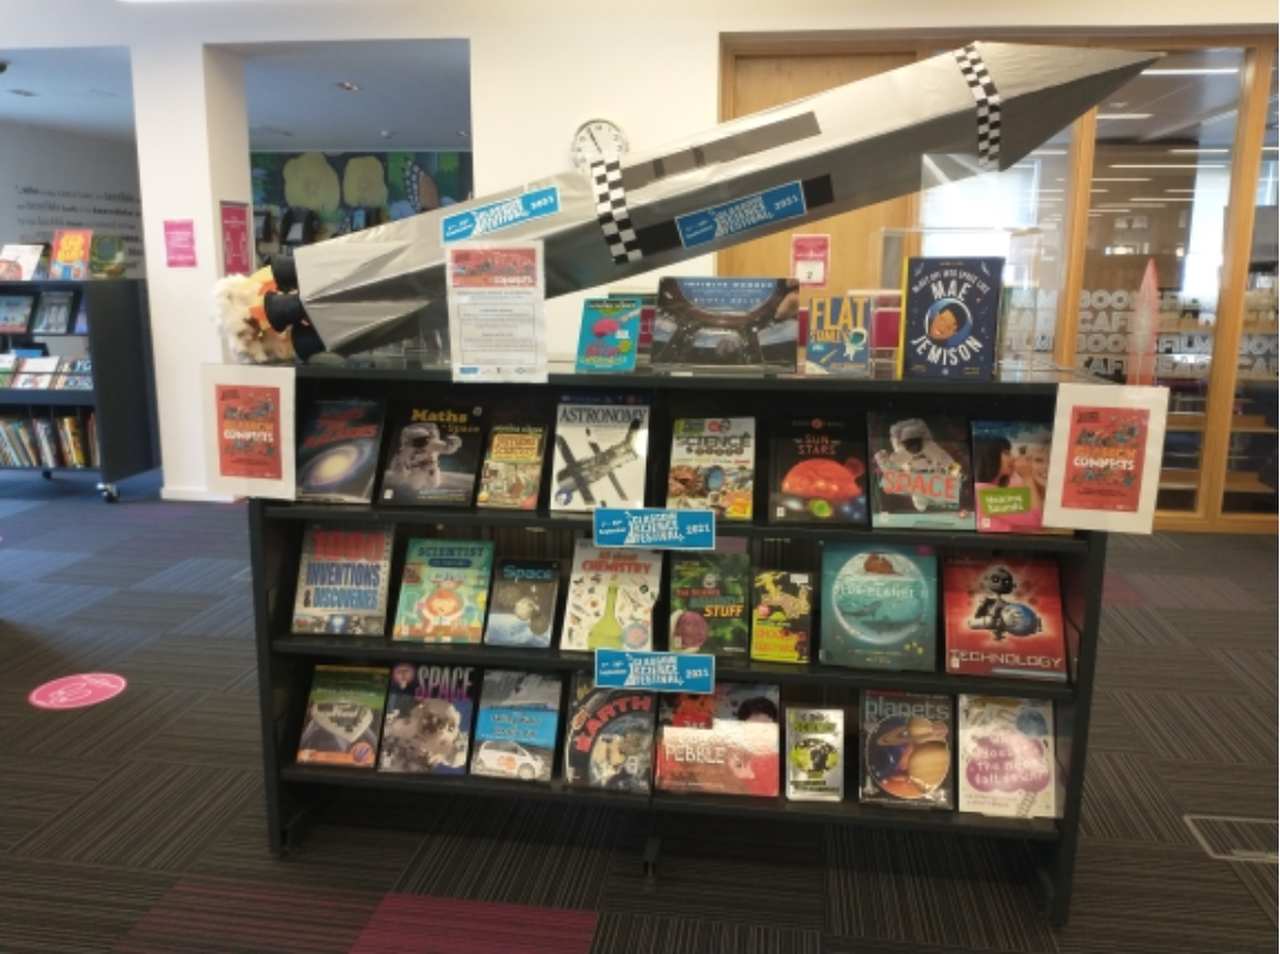 A bookshelf containing books about science with a focus on space. Above the bookshelf is a cardboard 3D model of a rocket which says ‘Glasgow Science Festival 2021’ on the side.